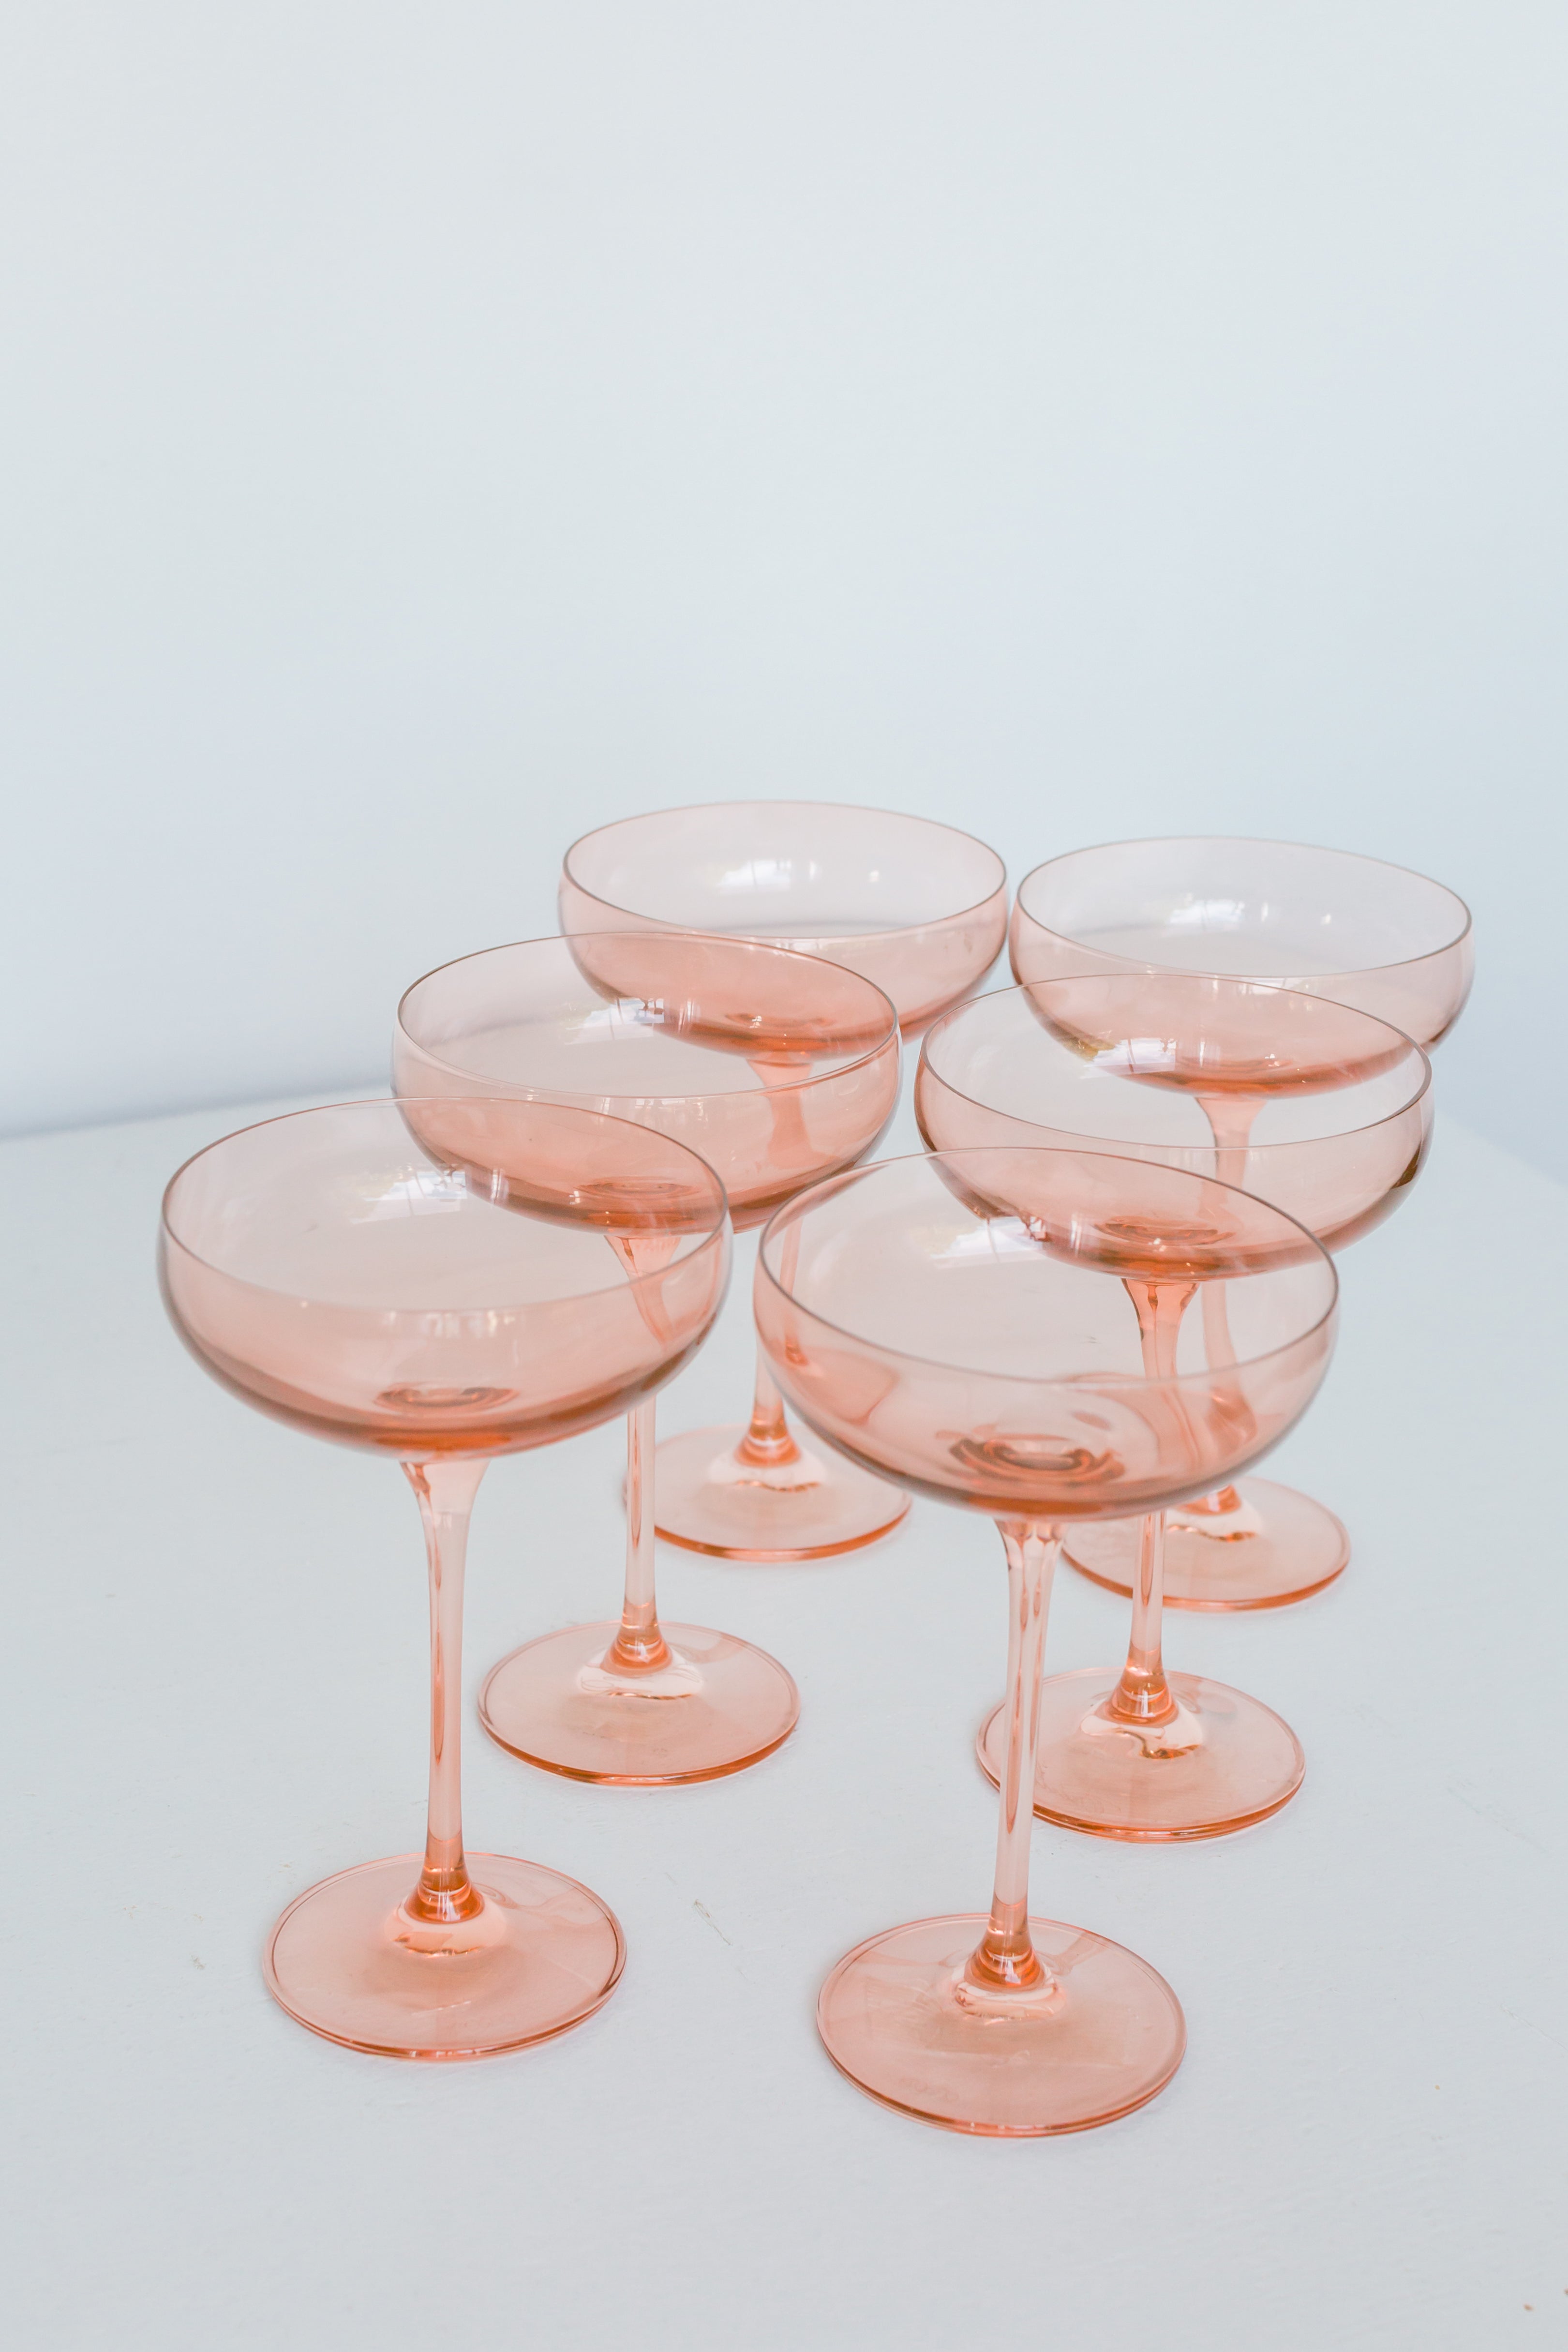 Estelle Colored Glass Champagne Coupes, Set of 6 - Blush Pink